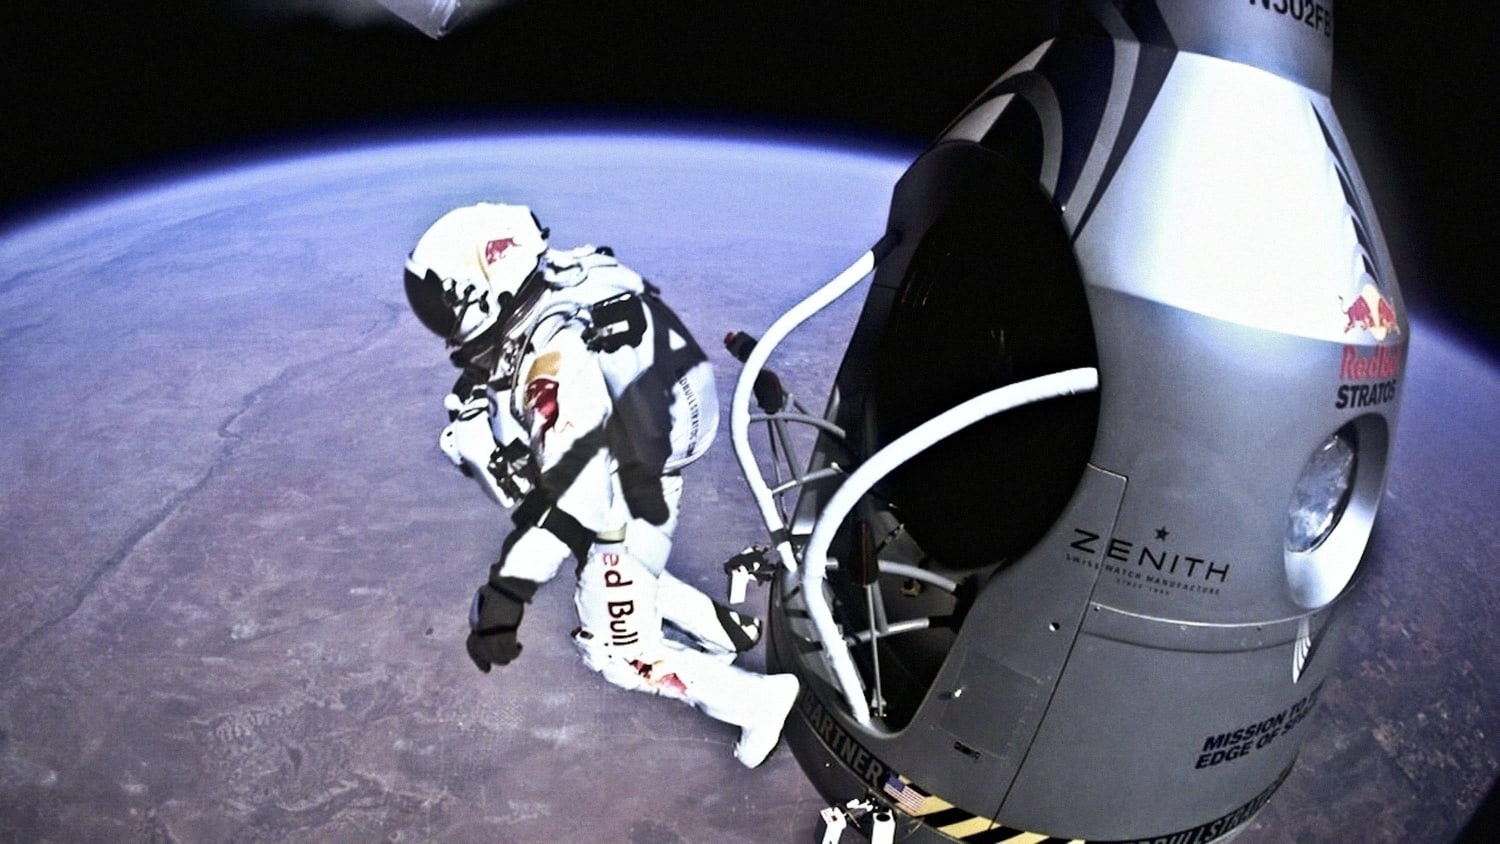 Ligner Reparation mulig Hassy Red Bull Stratos: Mission facts, figures and video